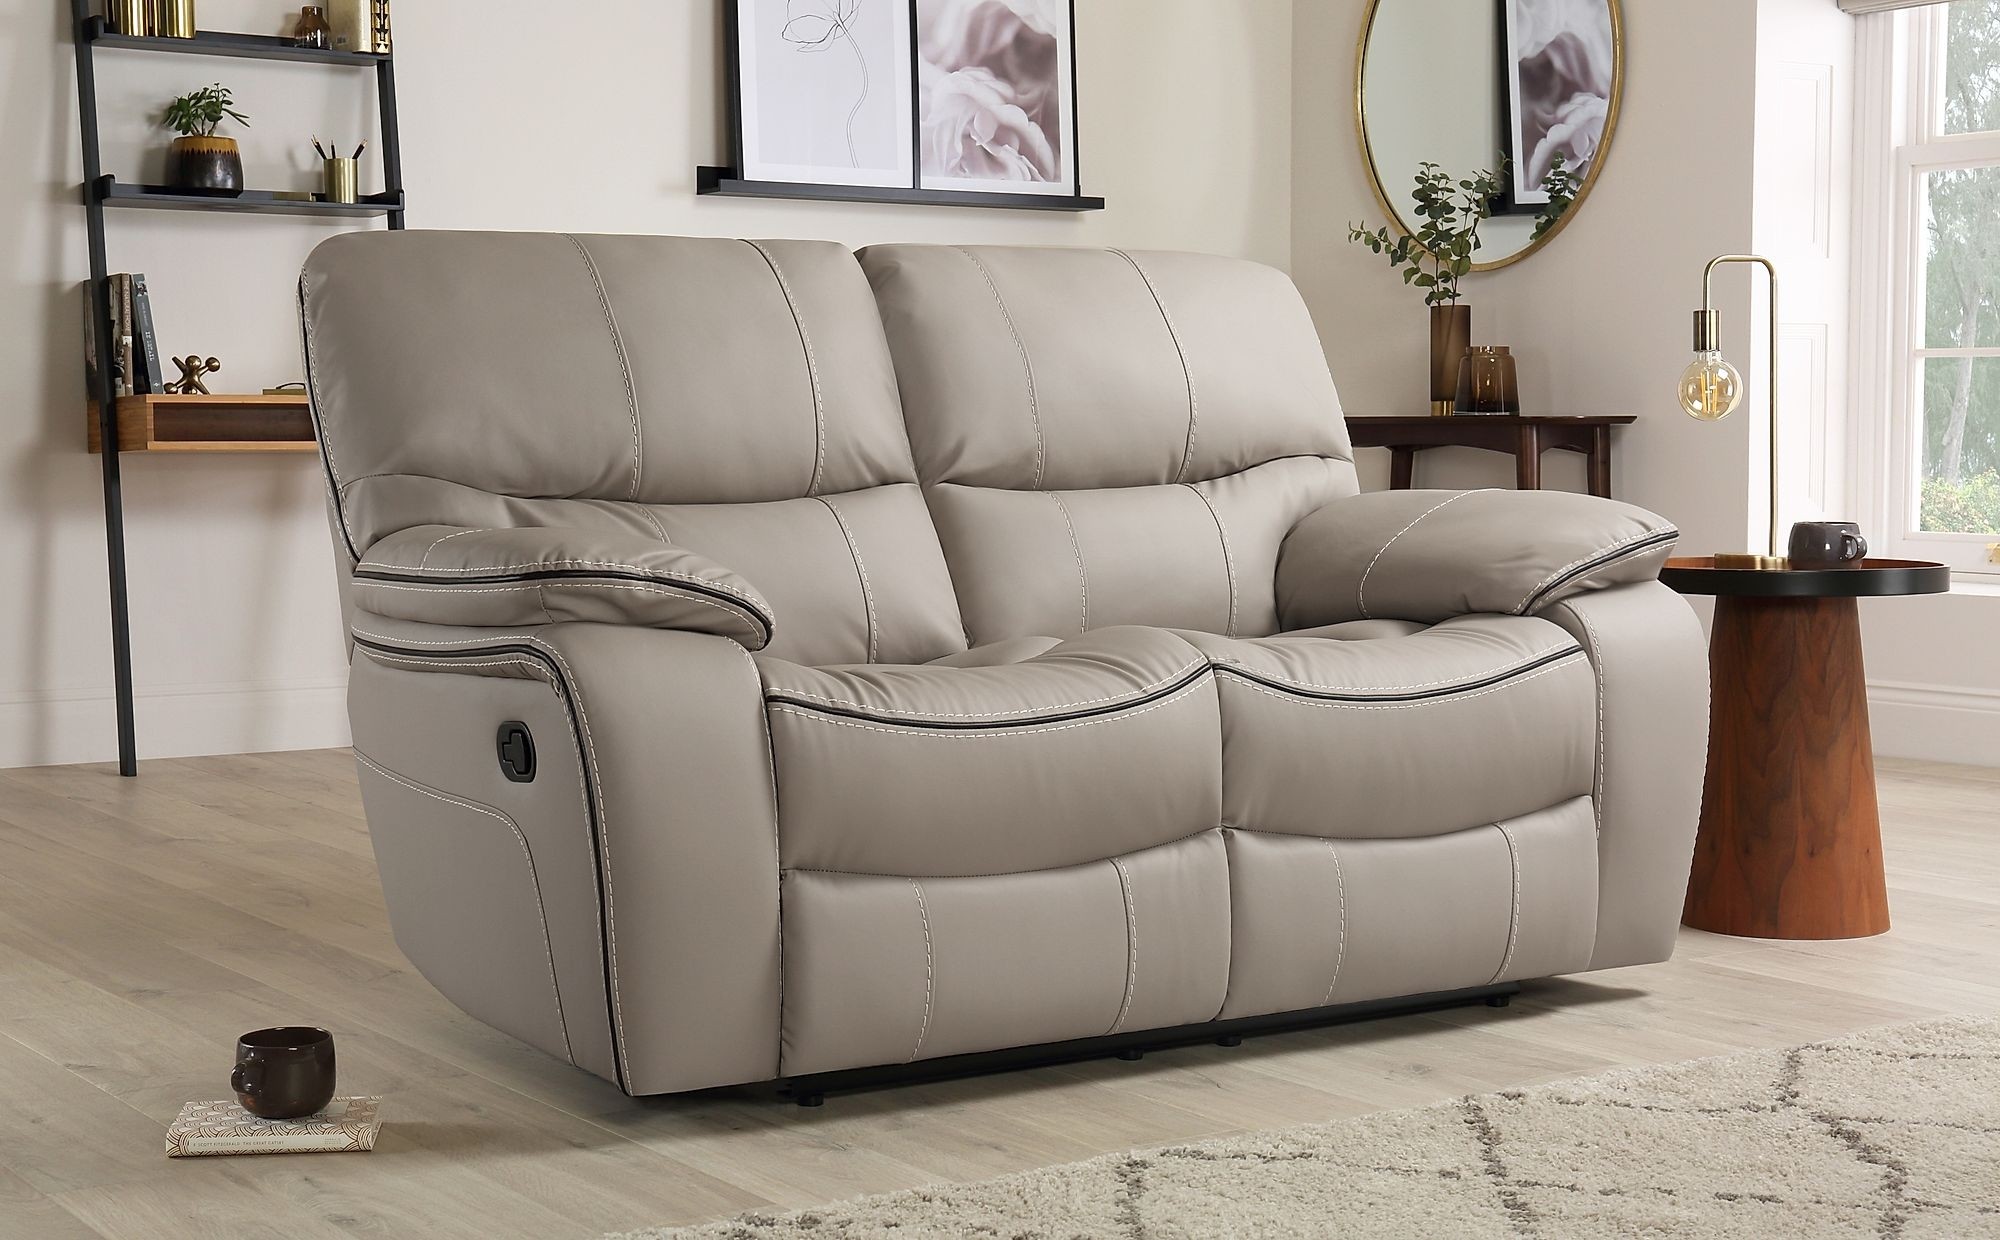 Beaumont taupe leather 2 seater recliner sofa furniture